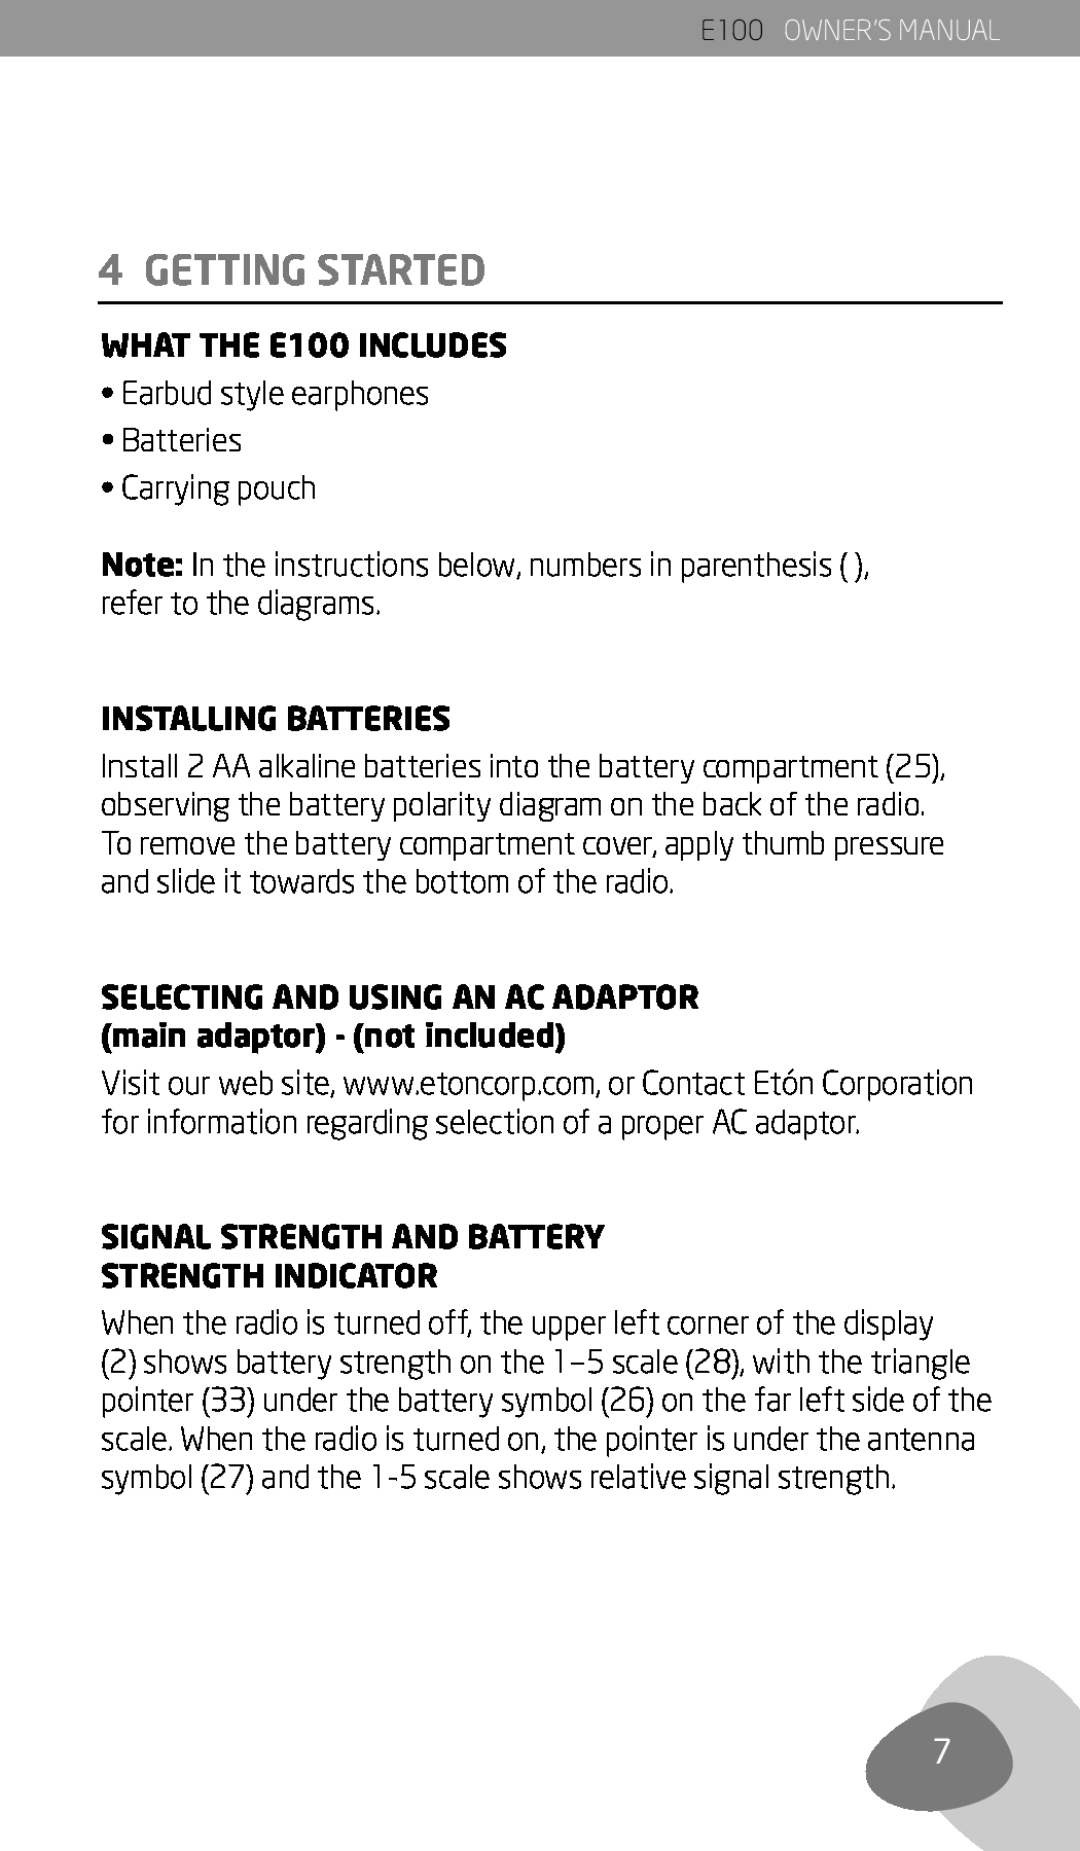 Eton Getting Started, WHAT THE E100 INCLUDES, Installing Batteries, Signal Strength And Battery Strength Indicator 